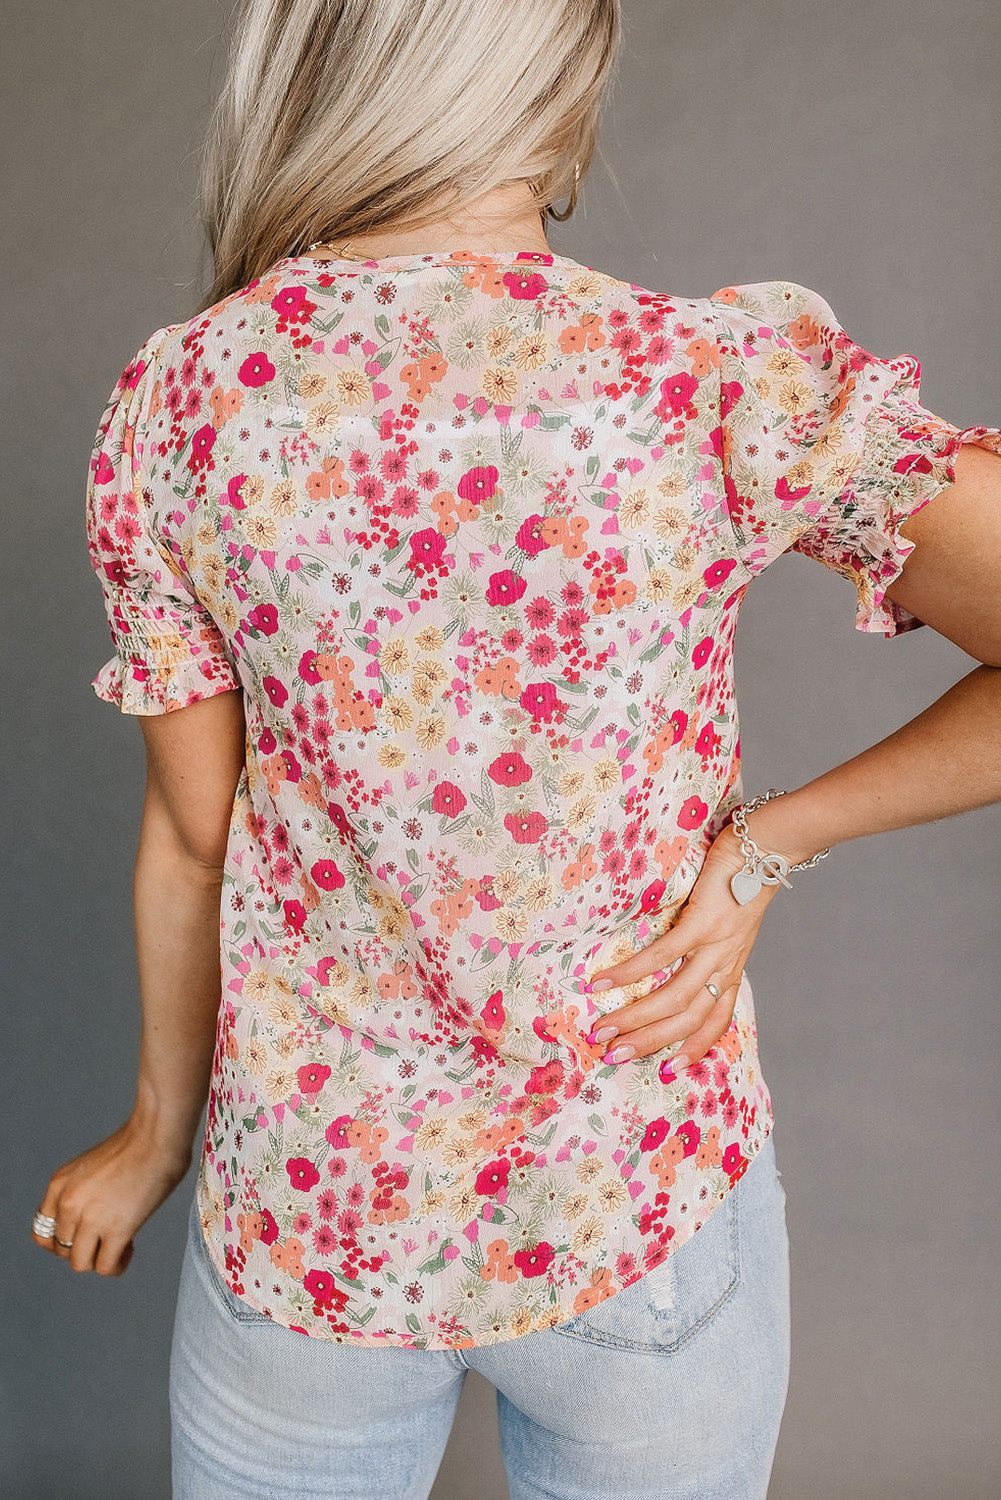 Rose Floral Ruffle Bubble Sleeve Blouse Naughty Smile Fashion